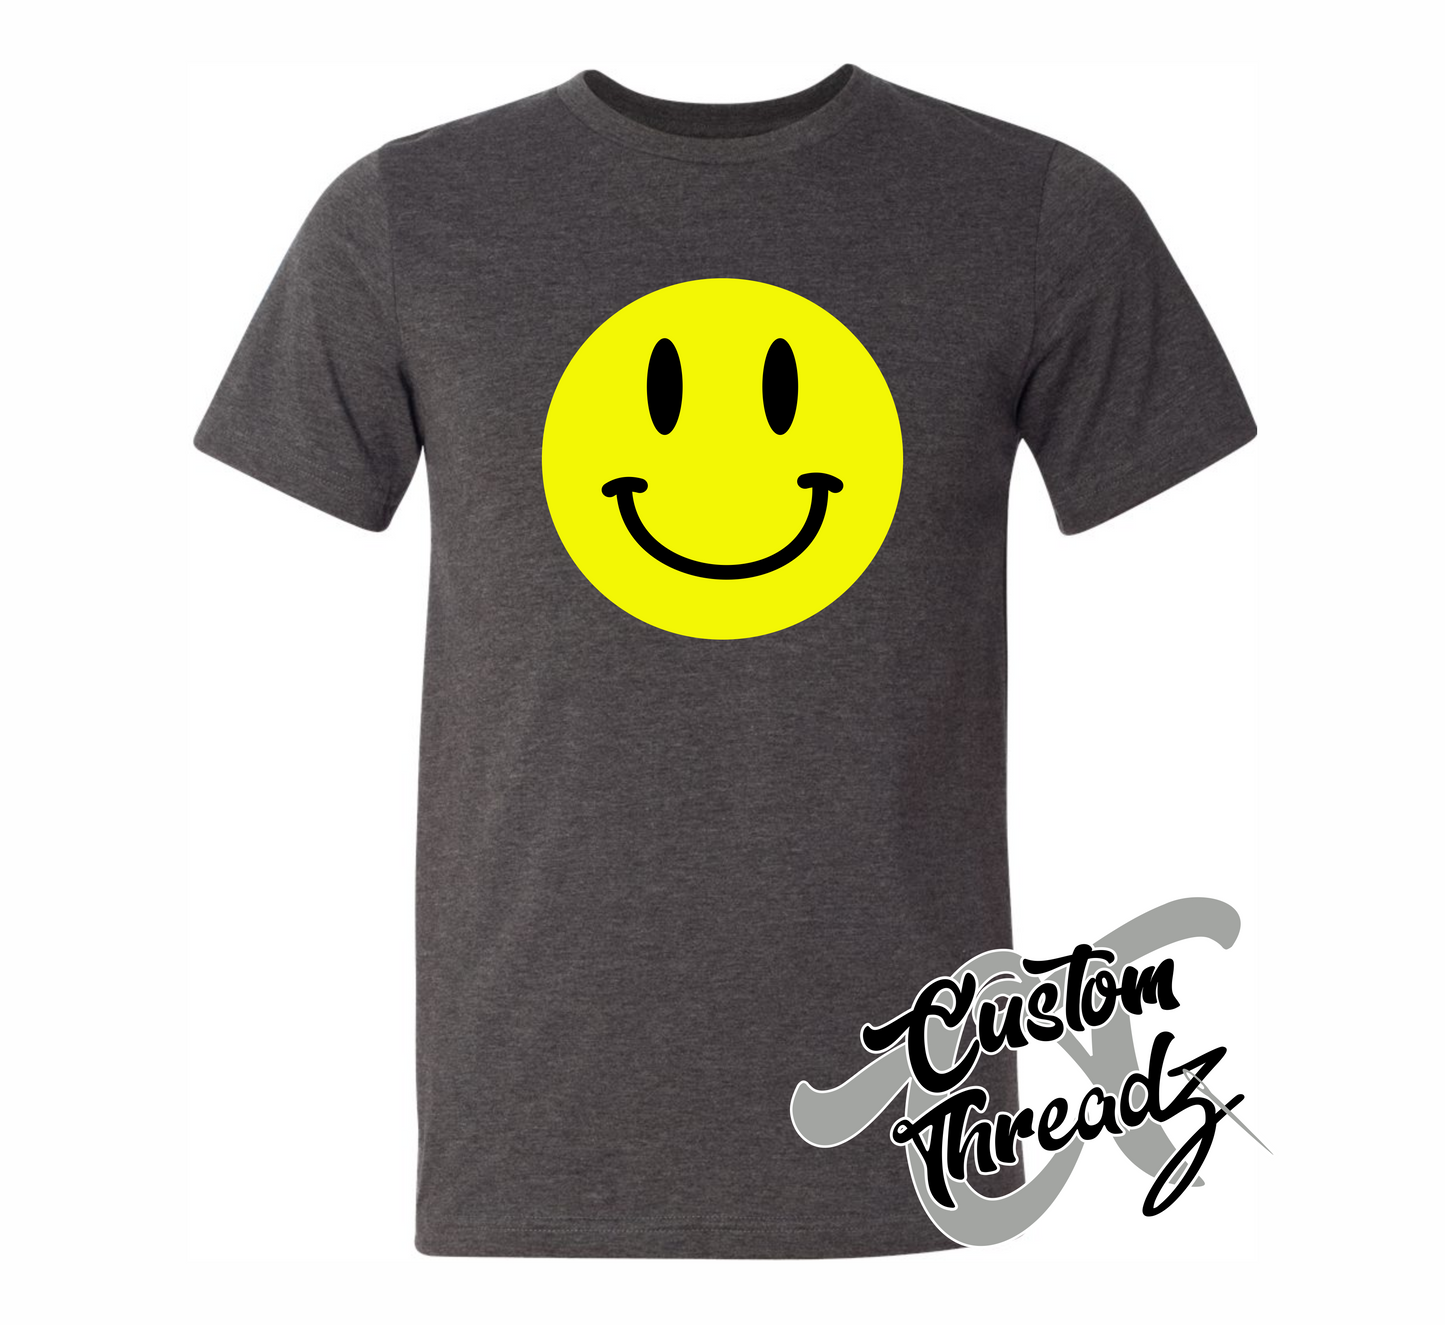 dark grey heather tee with smiley face DTG printed design